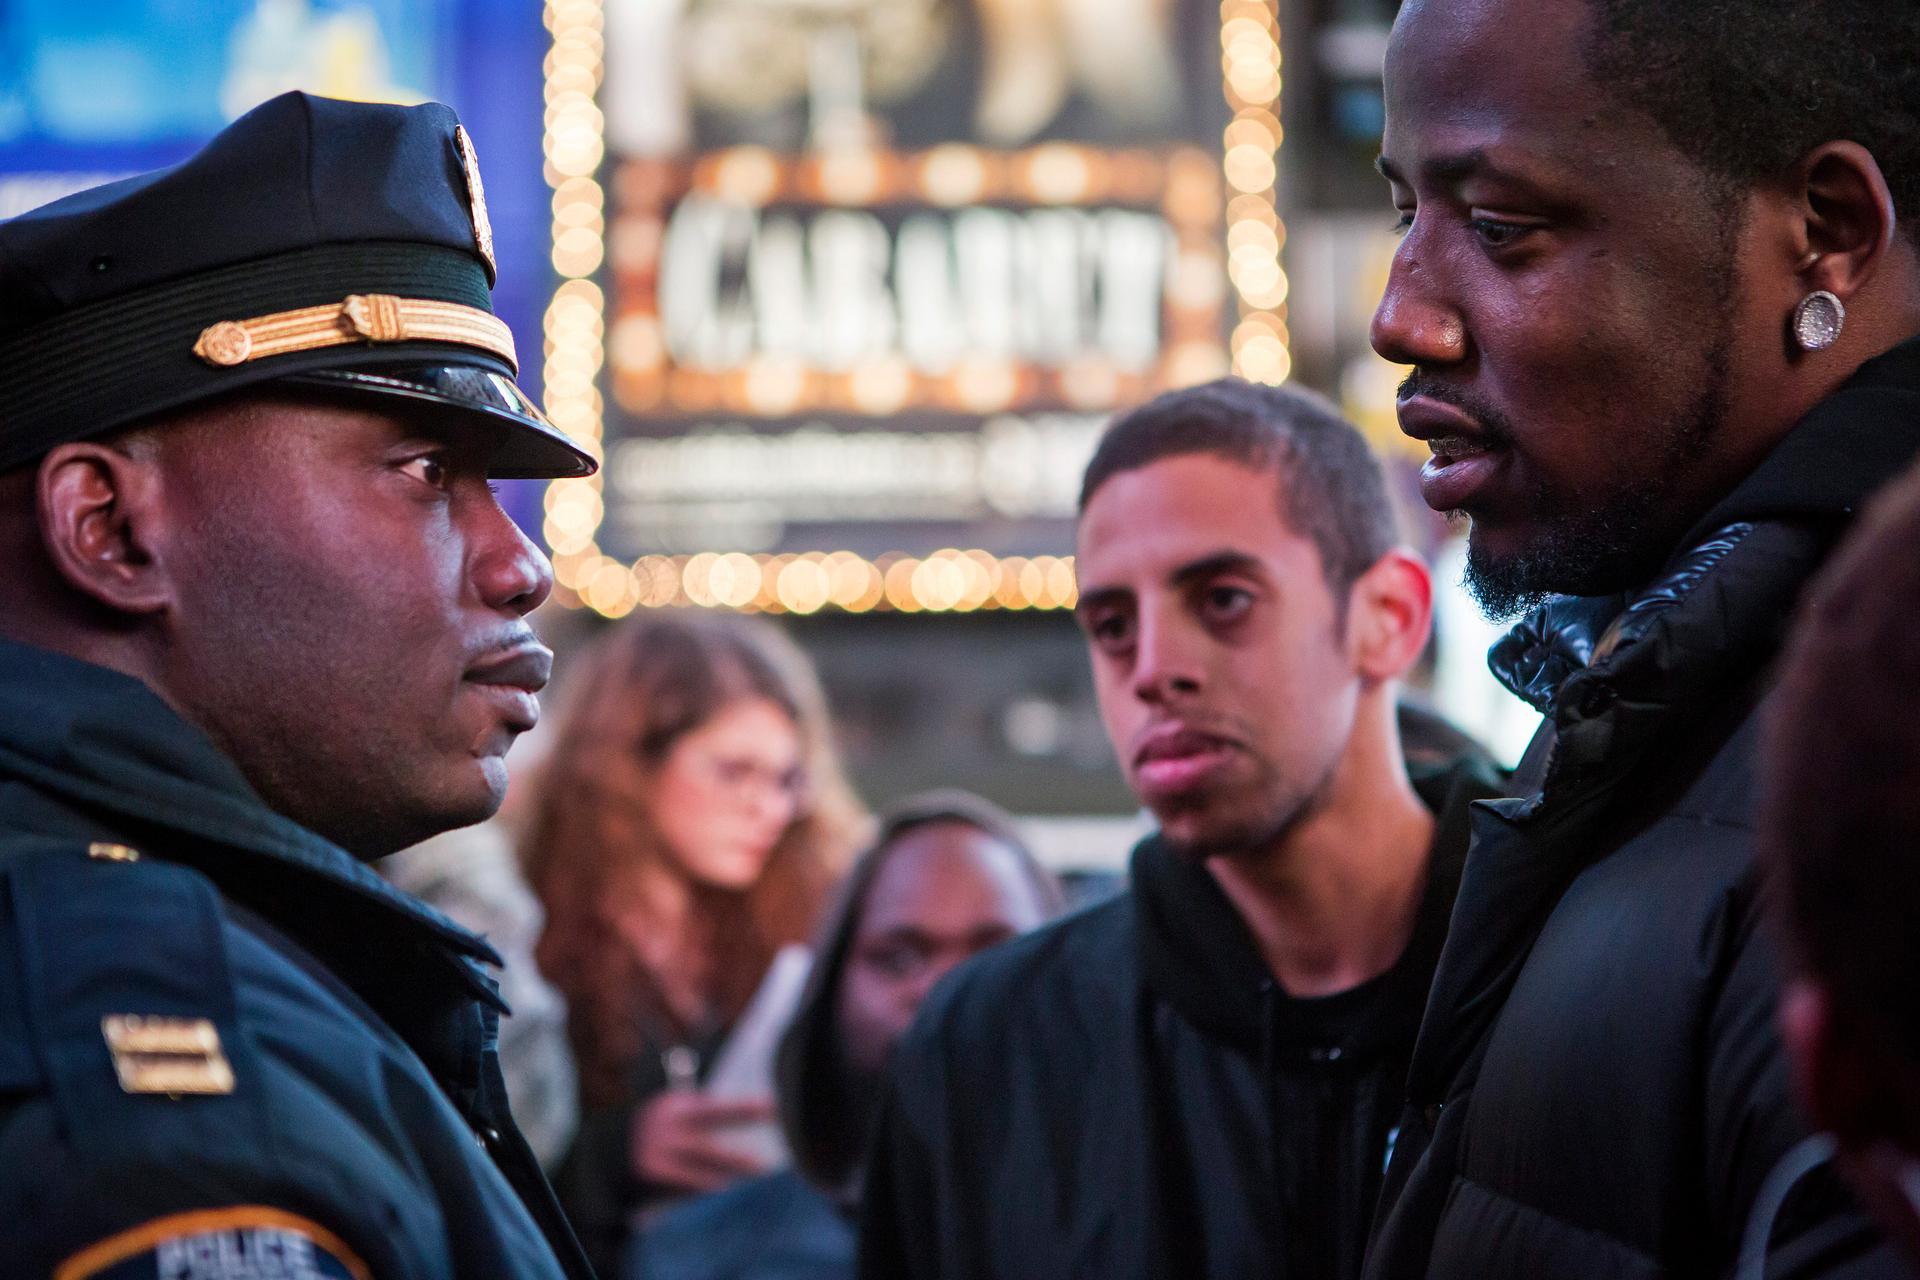 Protesters took to the streets of midtown Manhattan and other American cities after a New York City grand jury decided not to charge white police officer Daniel Pantaleo whose chokehold contributed to the death of Eric Garner, an unarmed black man. The US